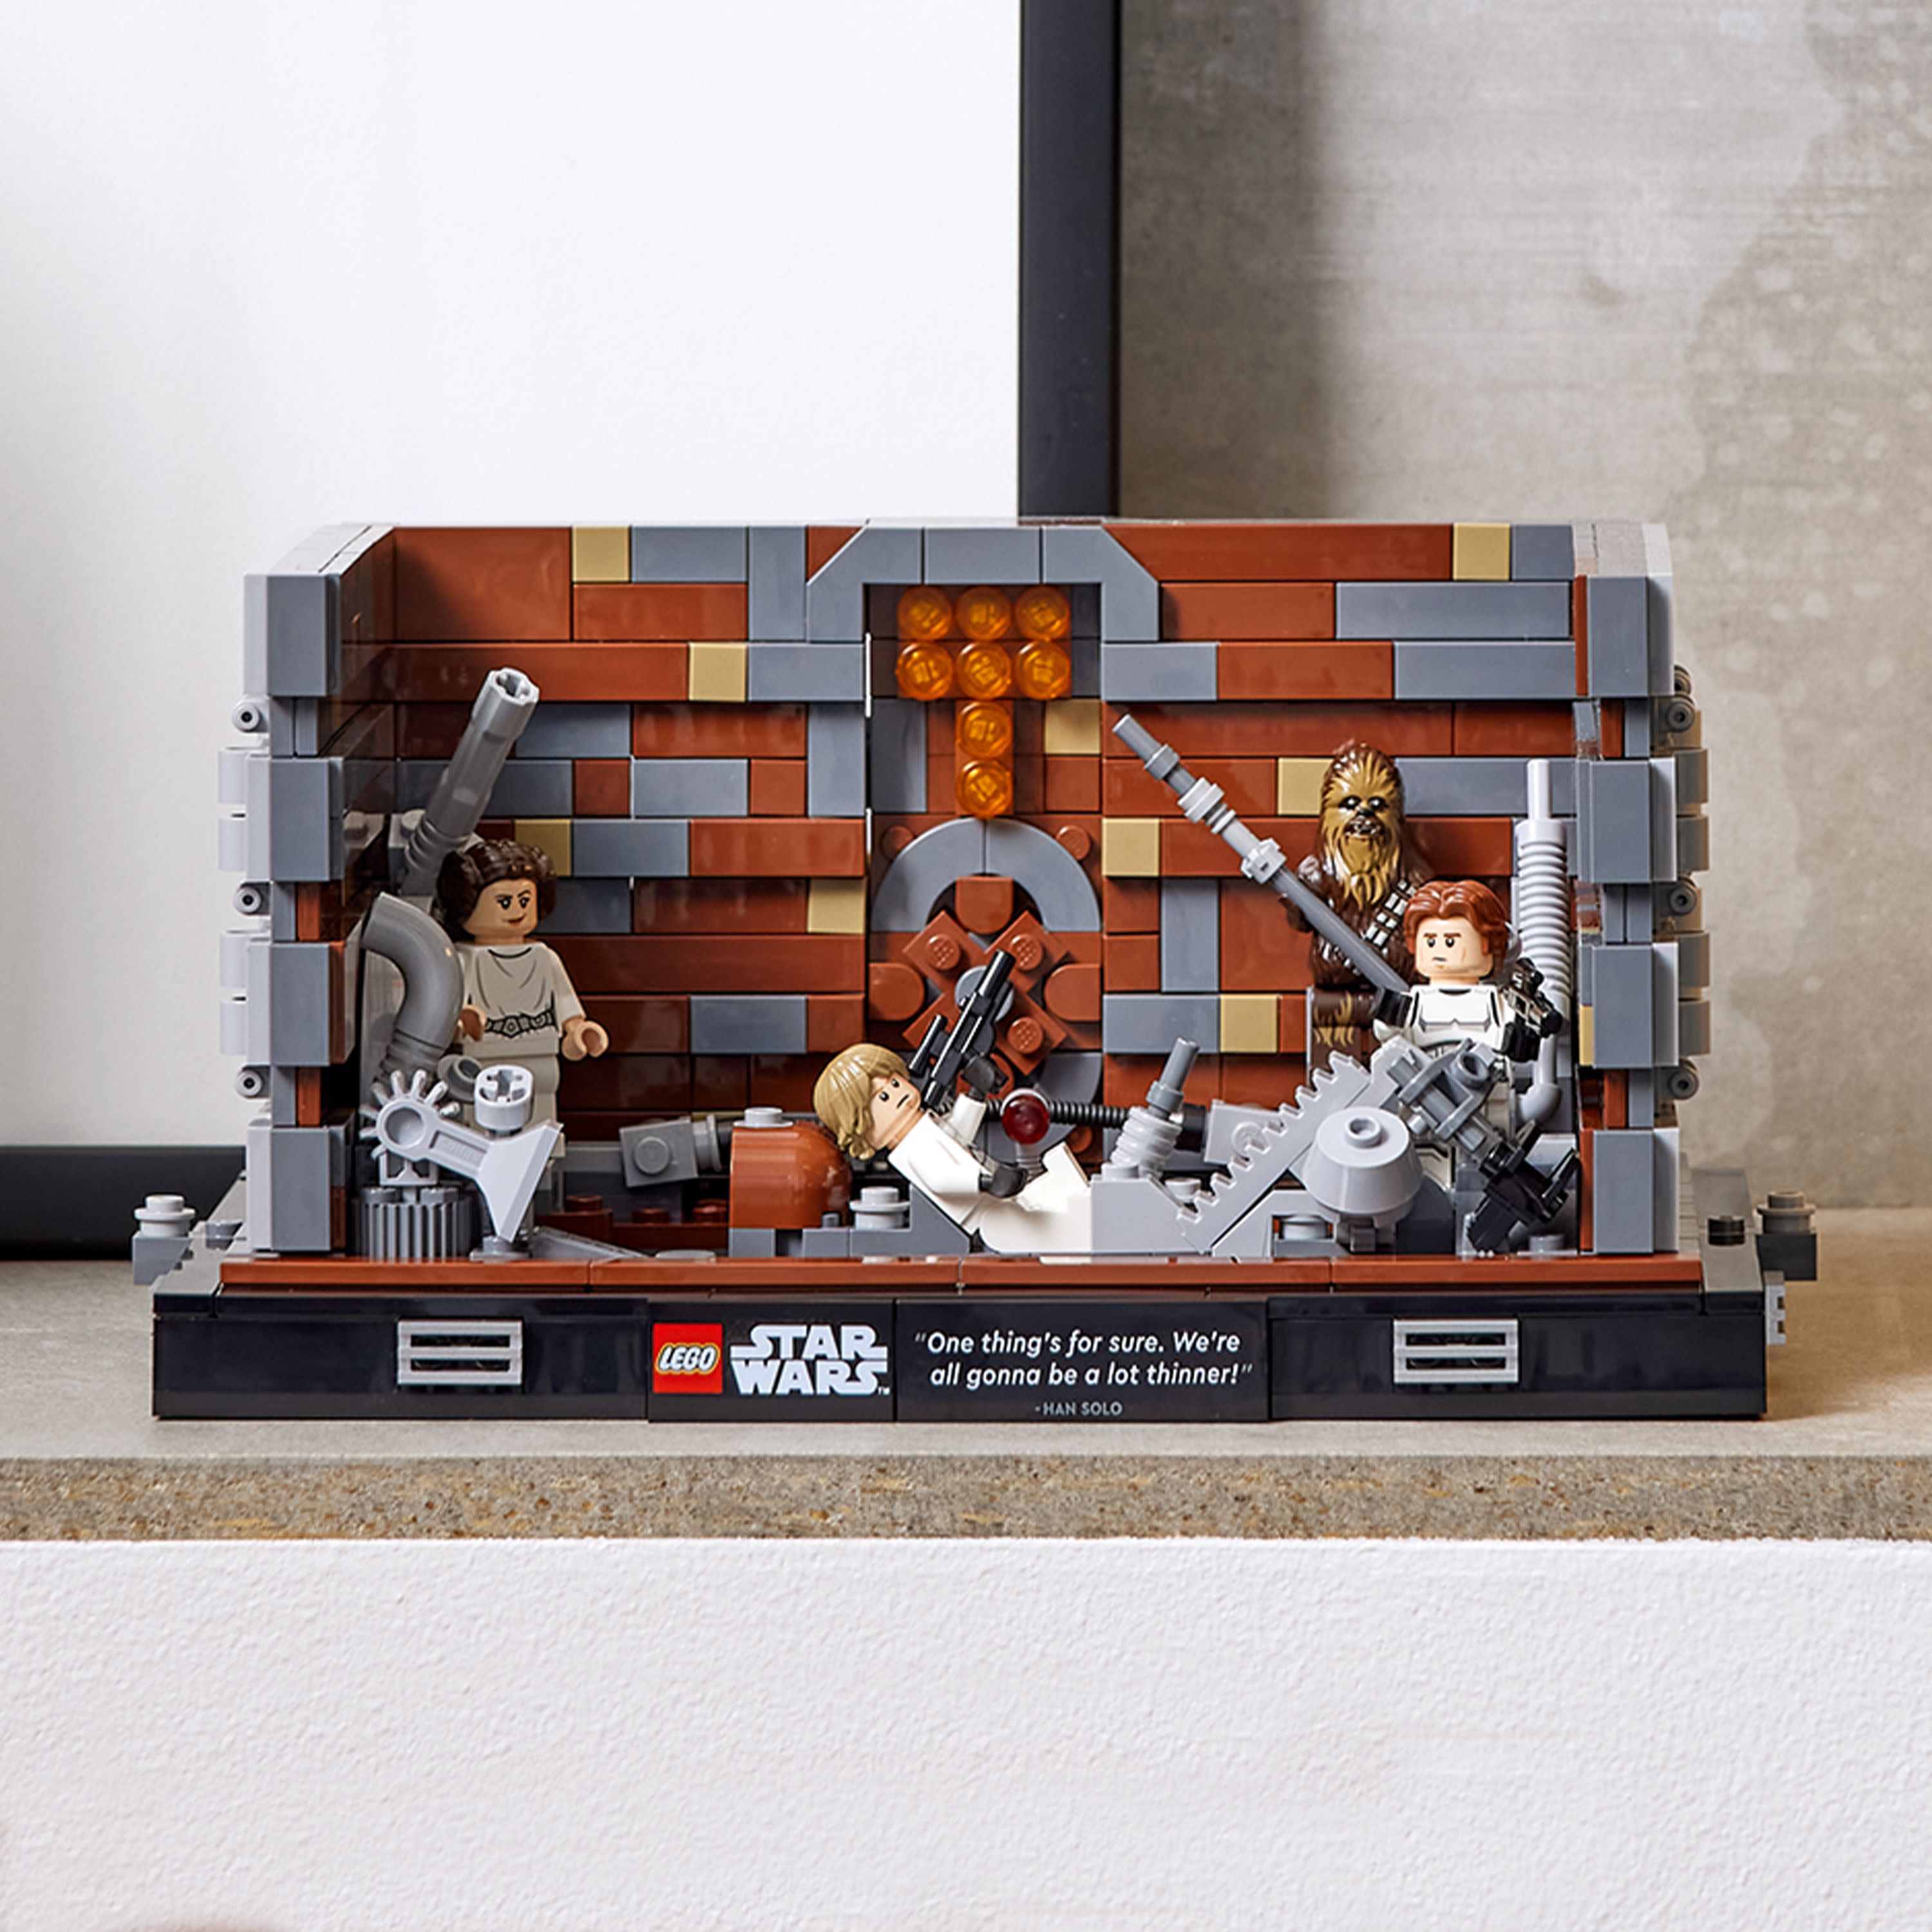 LEGO Star Wars Death Star Trash Compactor Diorama Series 75339 Adult Building Set with 6 Star Wars Figures including Princess Leia, Chewbacca & R2-D2, Gift for Star Wars Fans - image 5 of 8